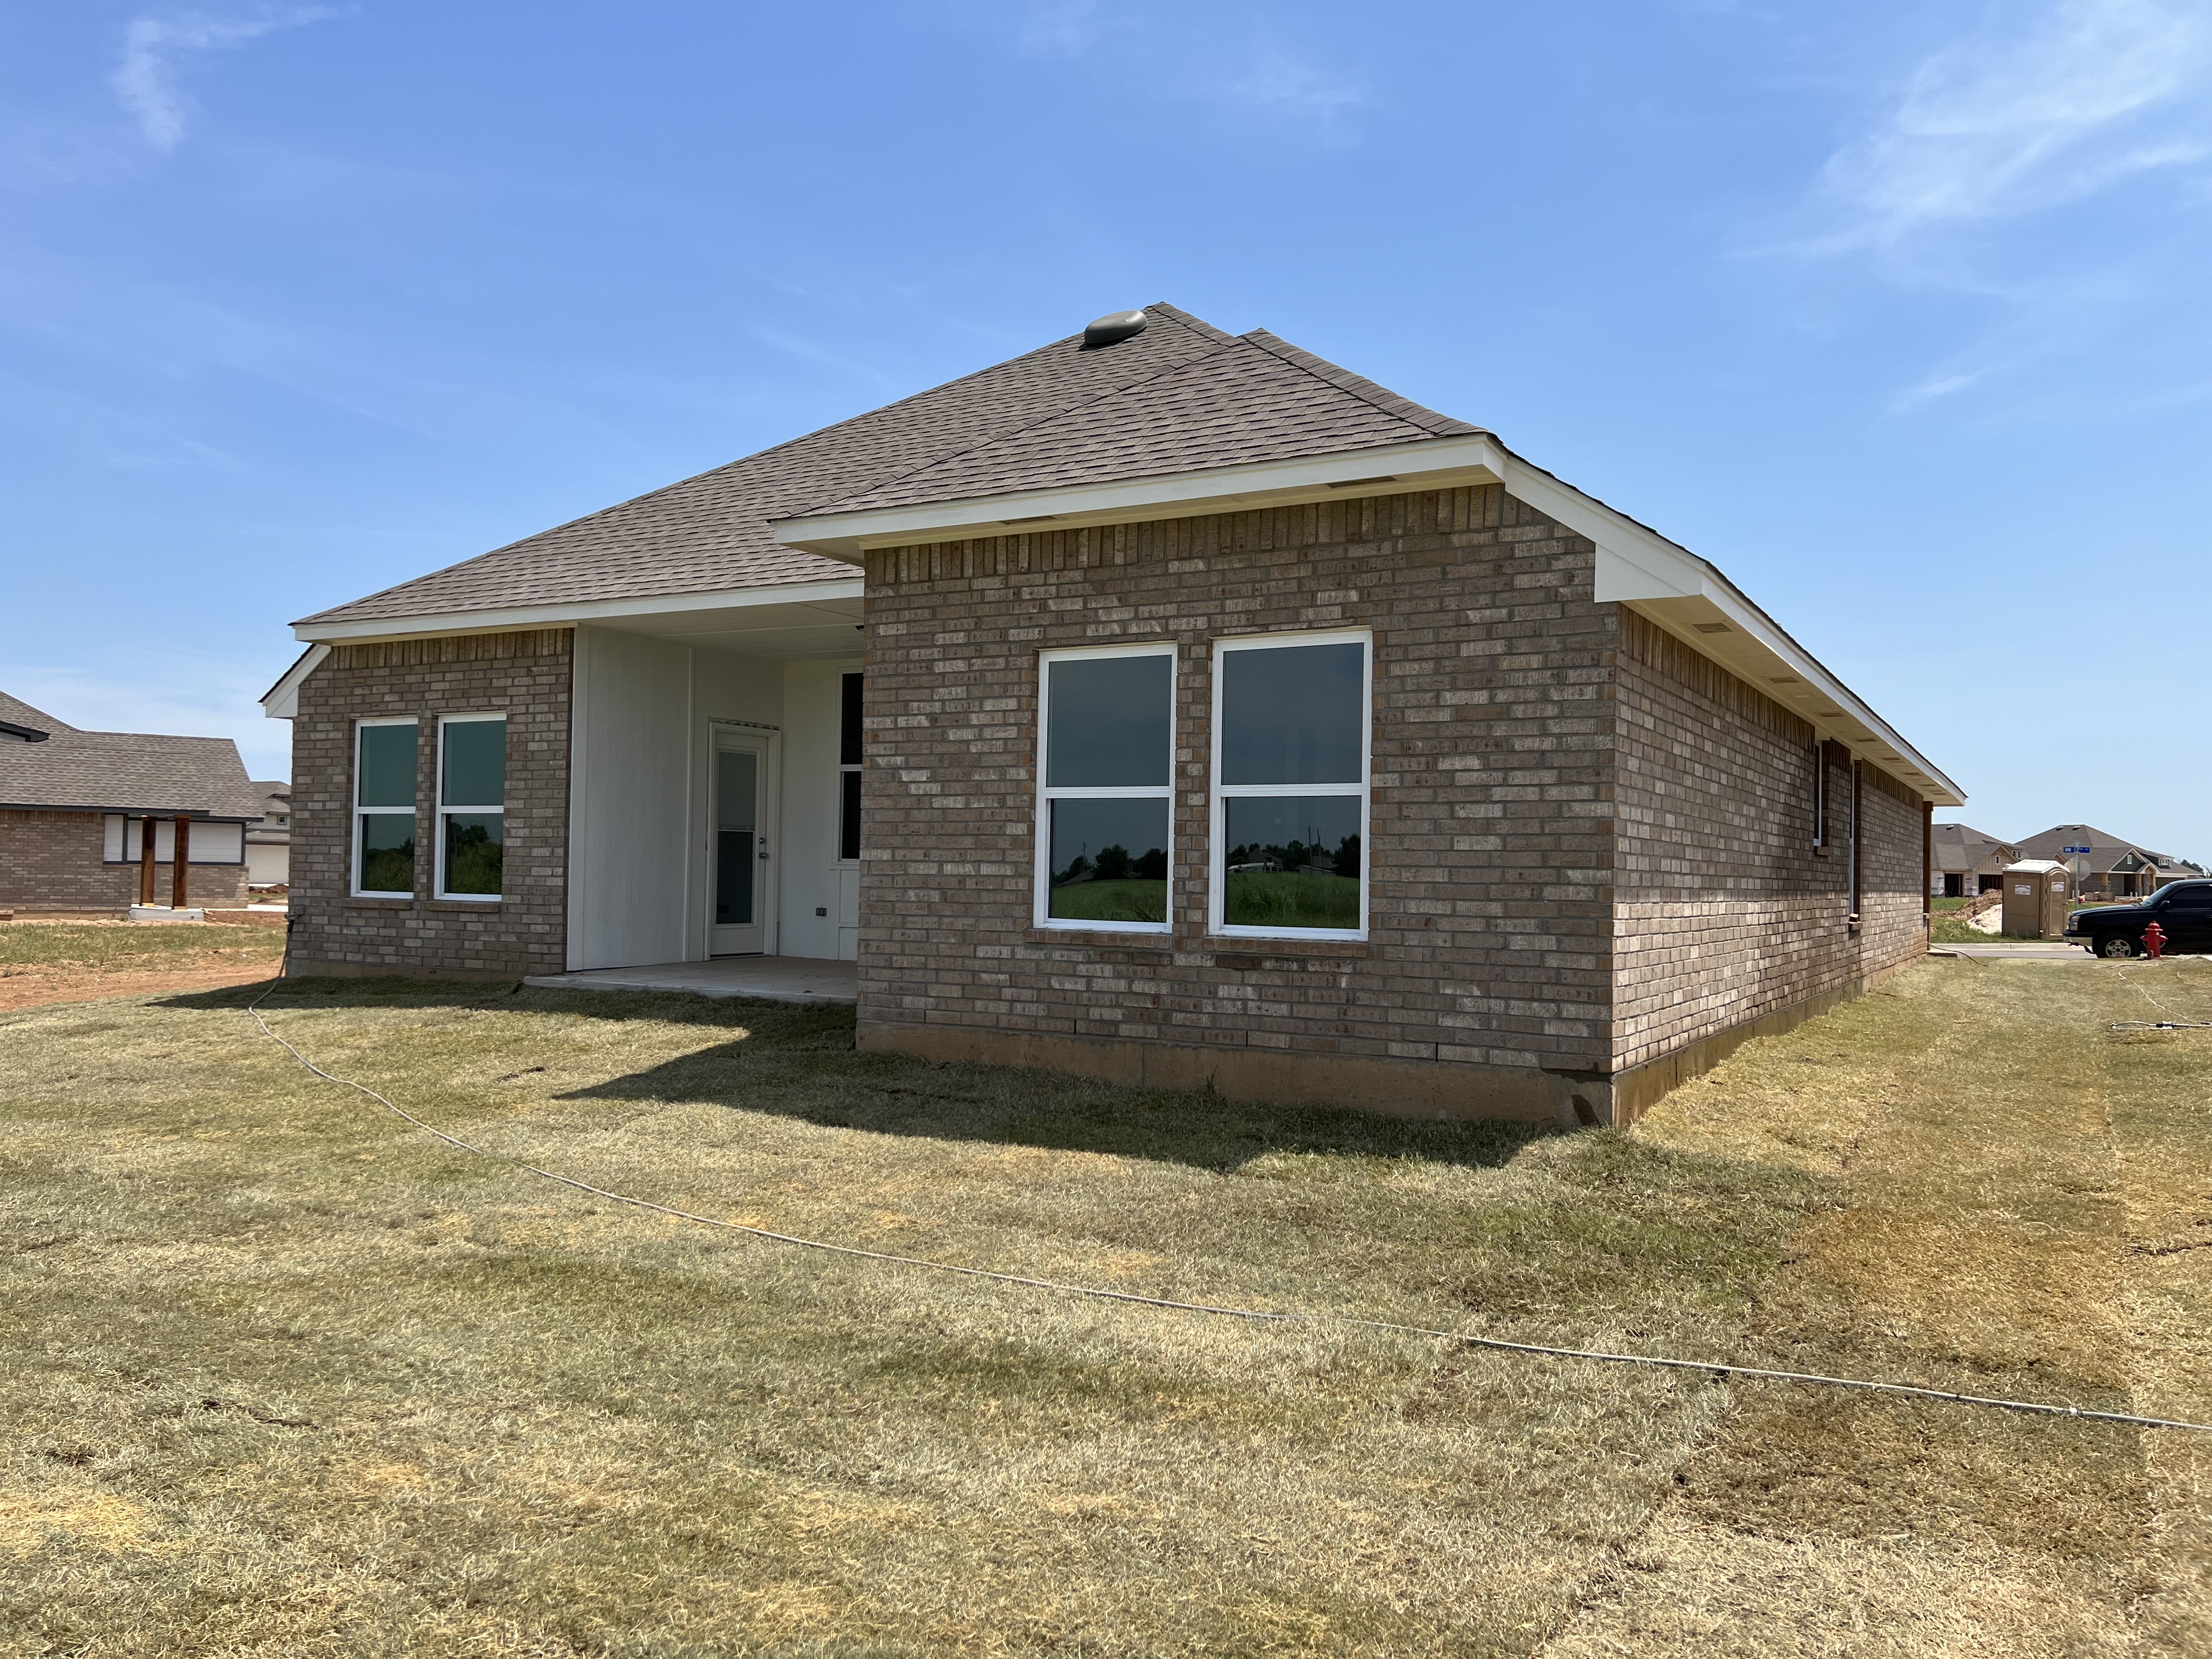 1173 NW 12th Street, Newcastle, Oklahoma 73065, 3 Bedrooms Bedrooms, ,2 BathroomsBathrooms,House,For Sale,NW 12th Street,1390